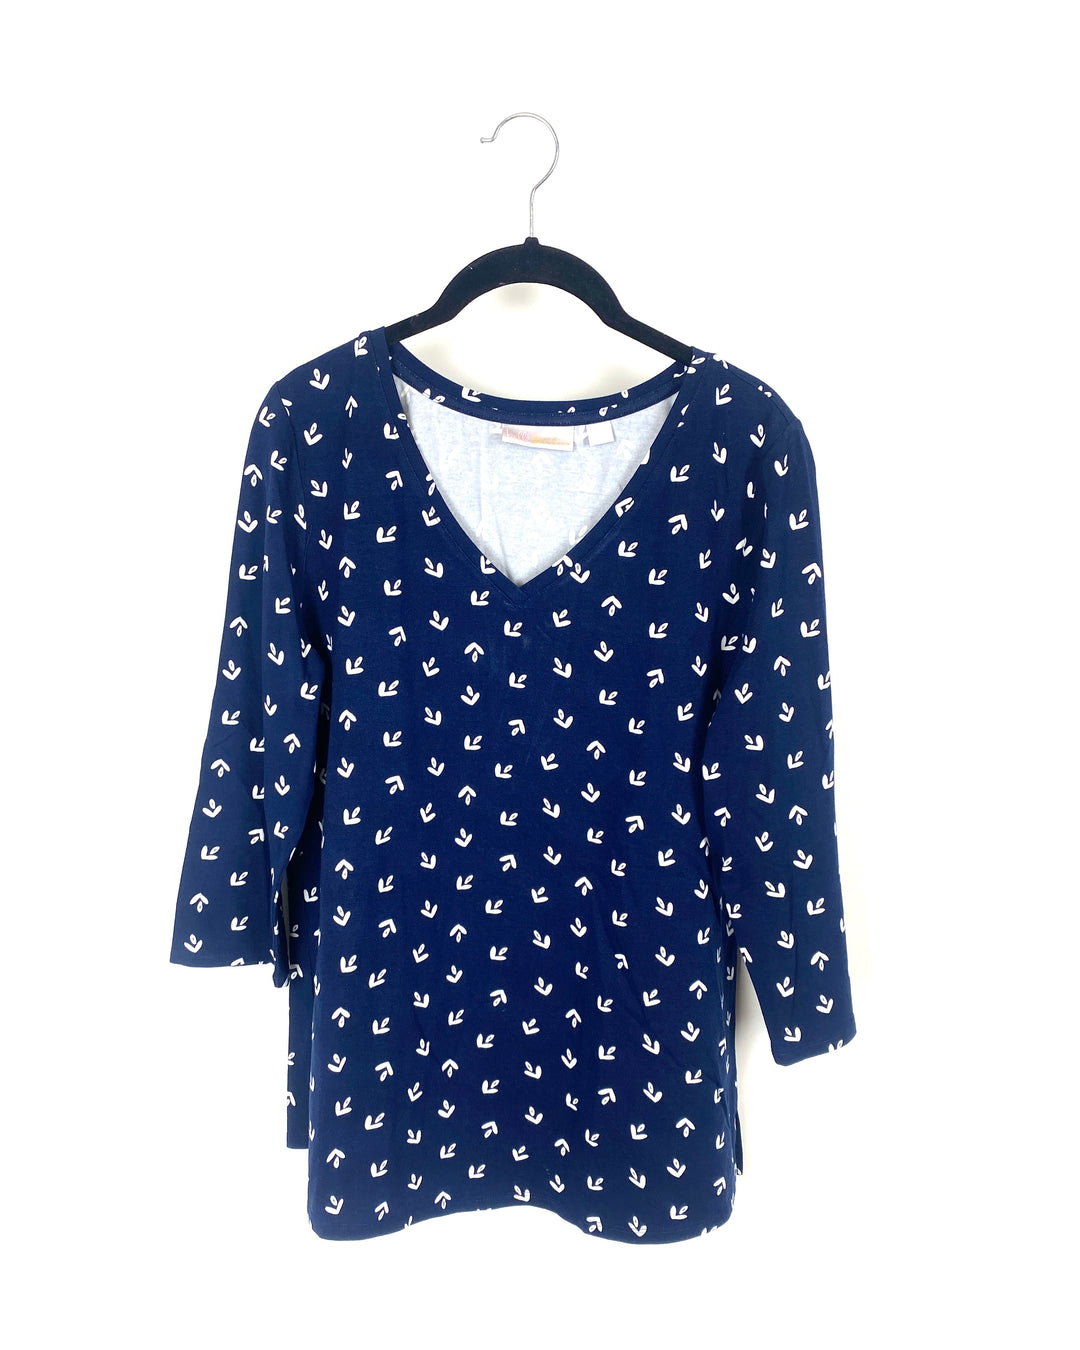 Blue And White Printed Top - Small/Medium